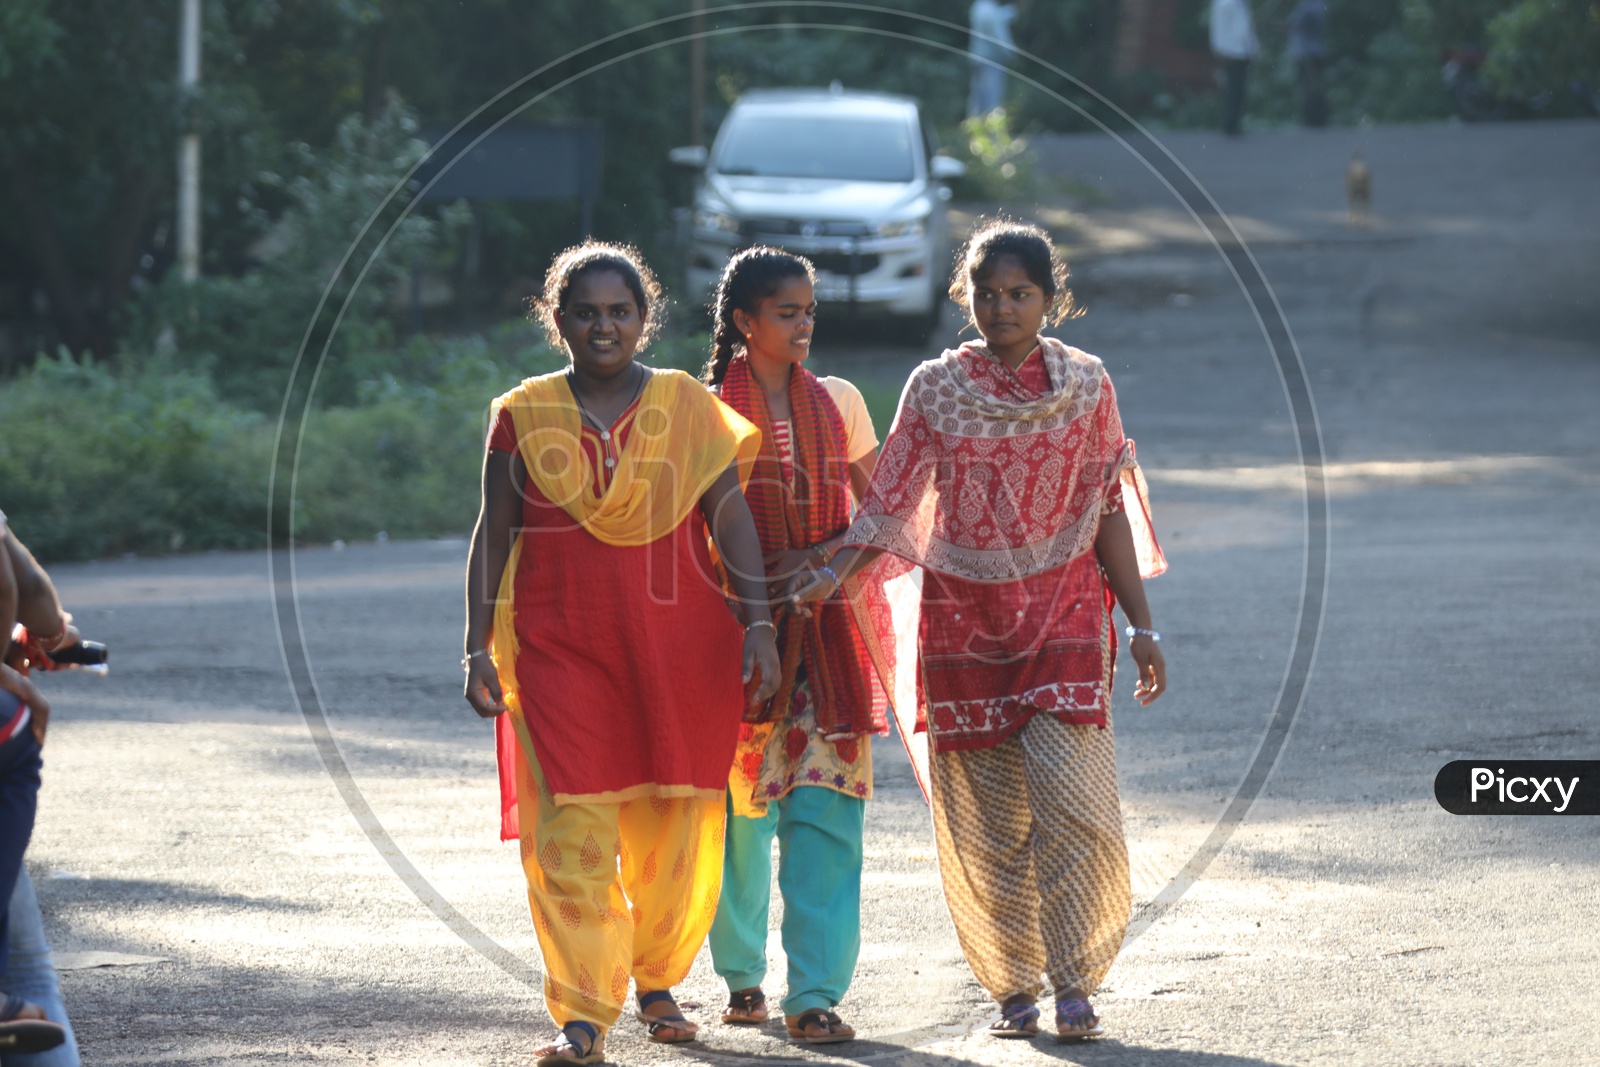 Group of Indian Girls walking on the road